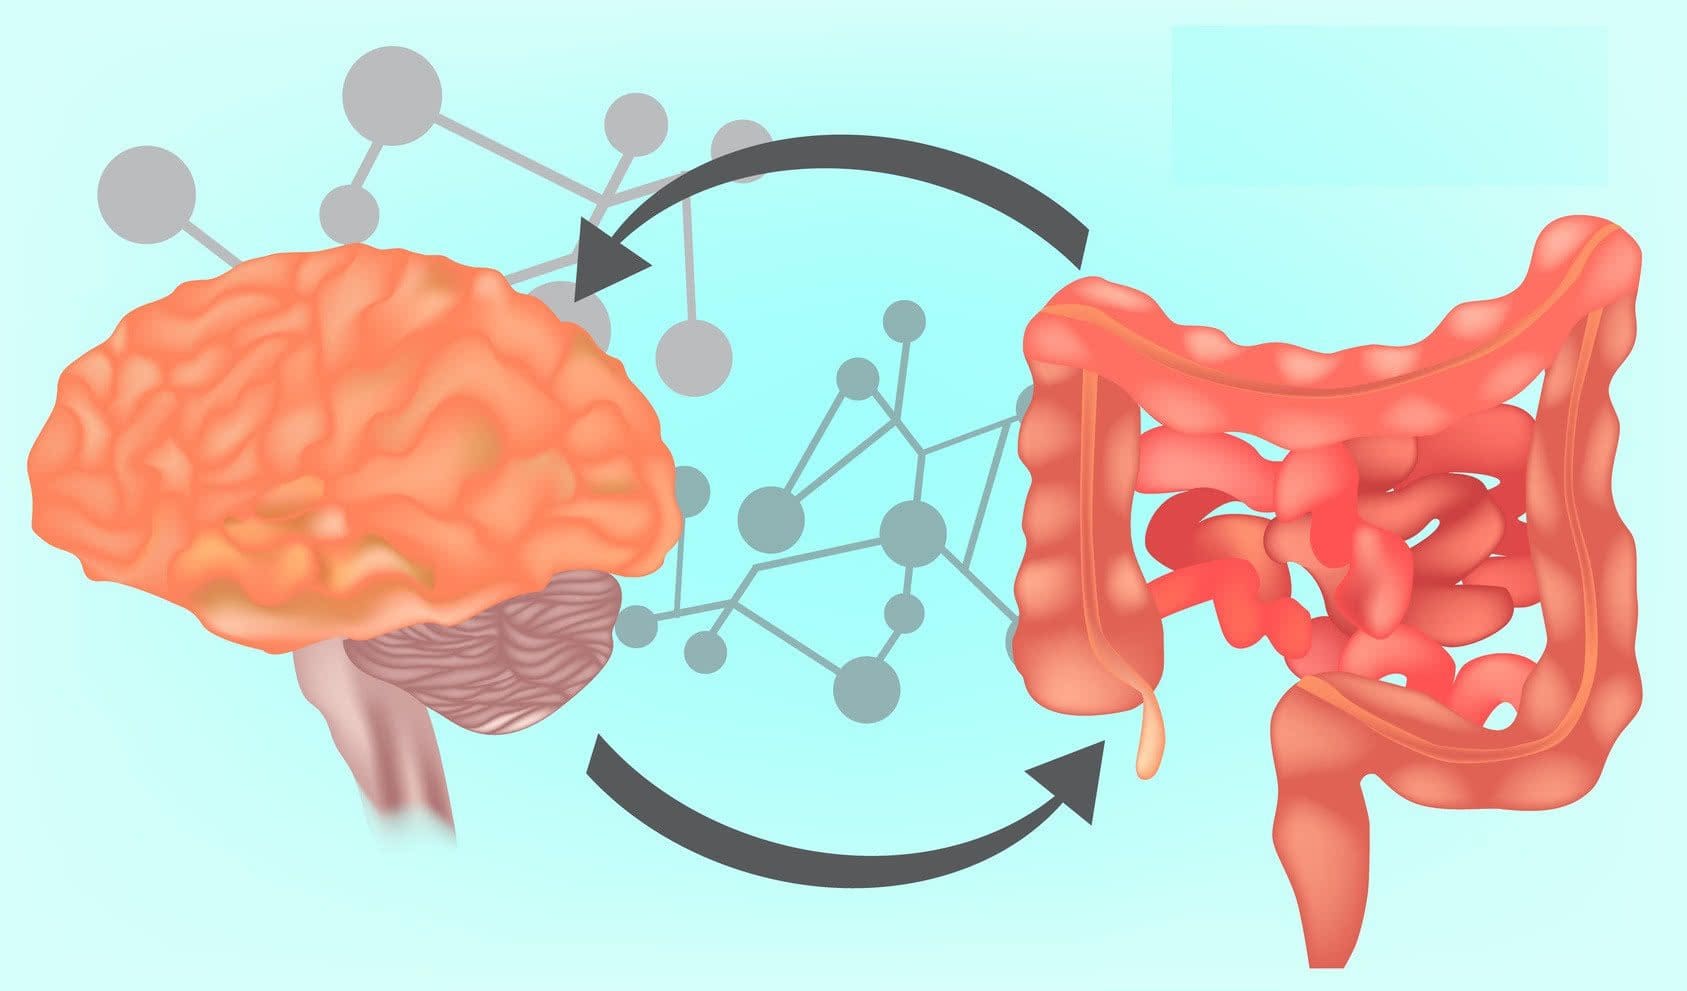 Functional Neurology: What is the Gut-Brain Axis? | El Paso, TX Chiropractor